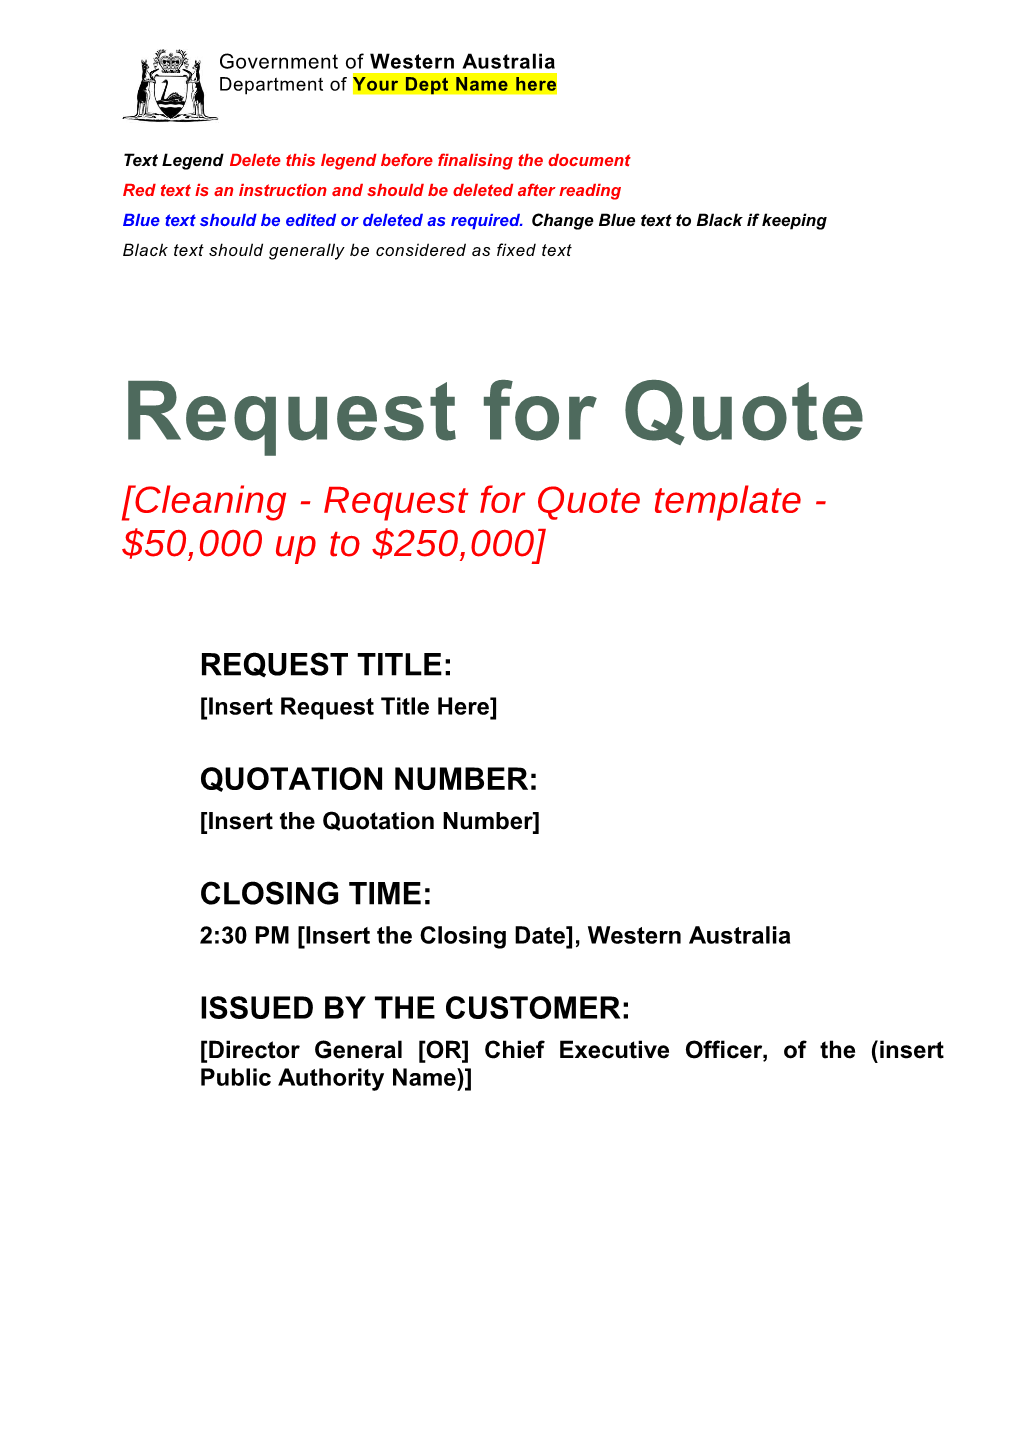 Request for Quote Cleaning